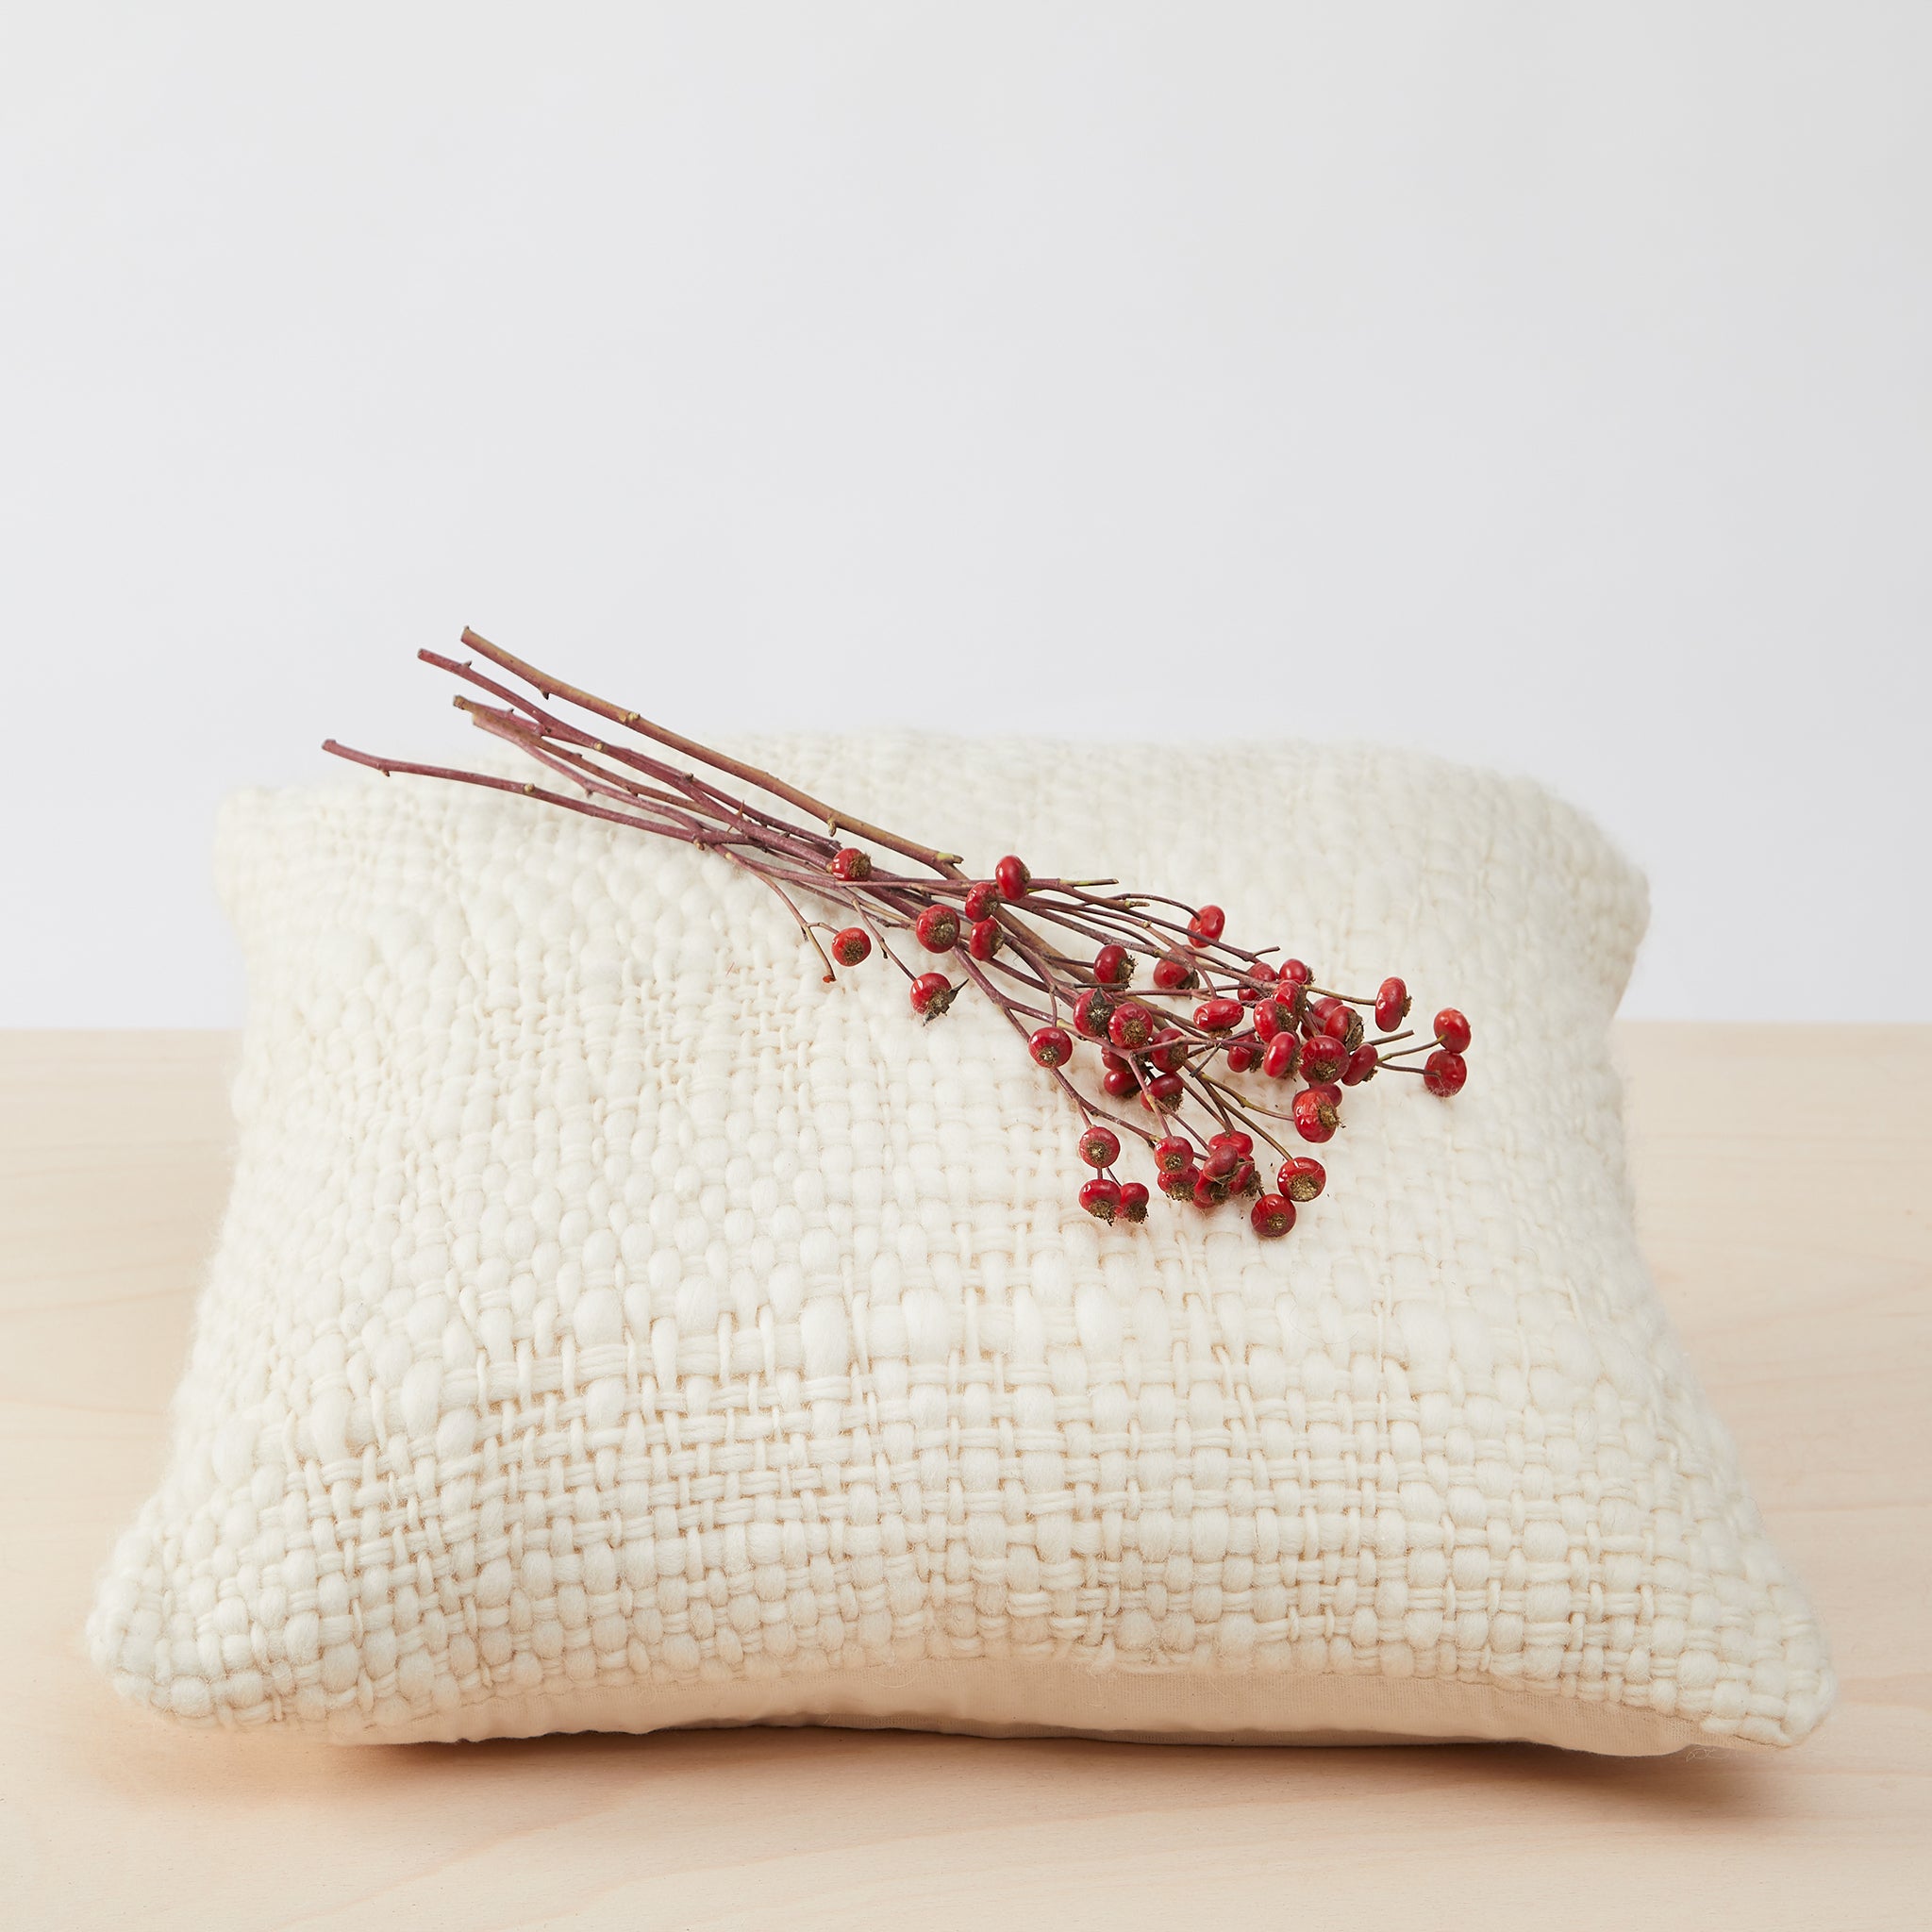 Moodfoto with plant: Hand-woven cushion "Sueno", 50x50cm, natural